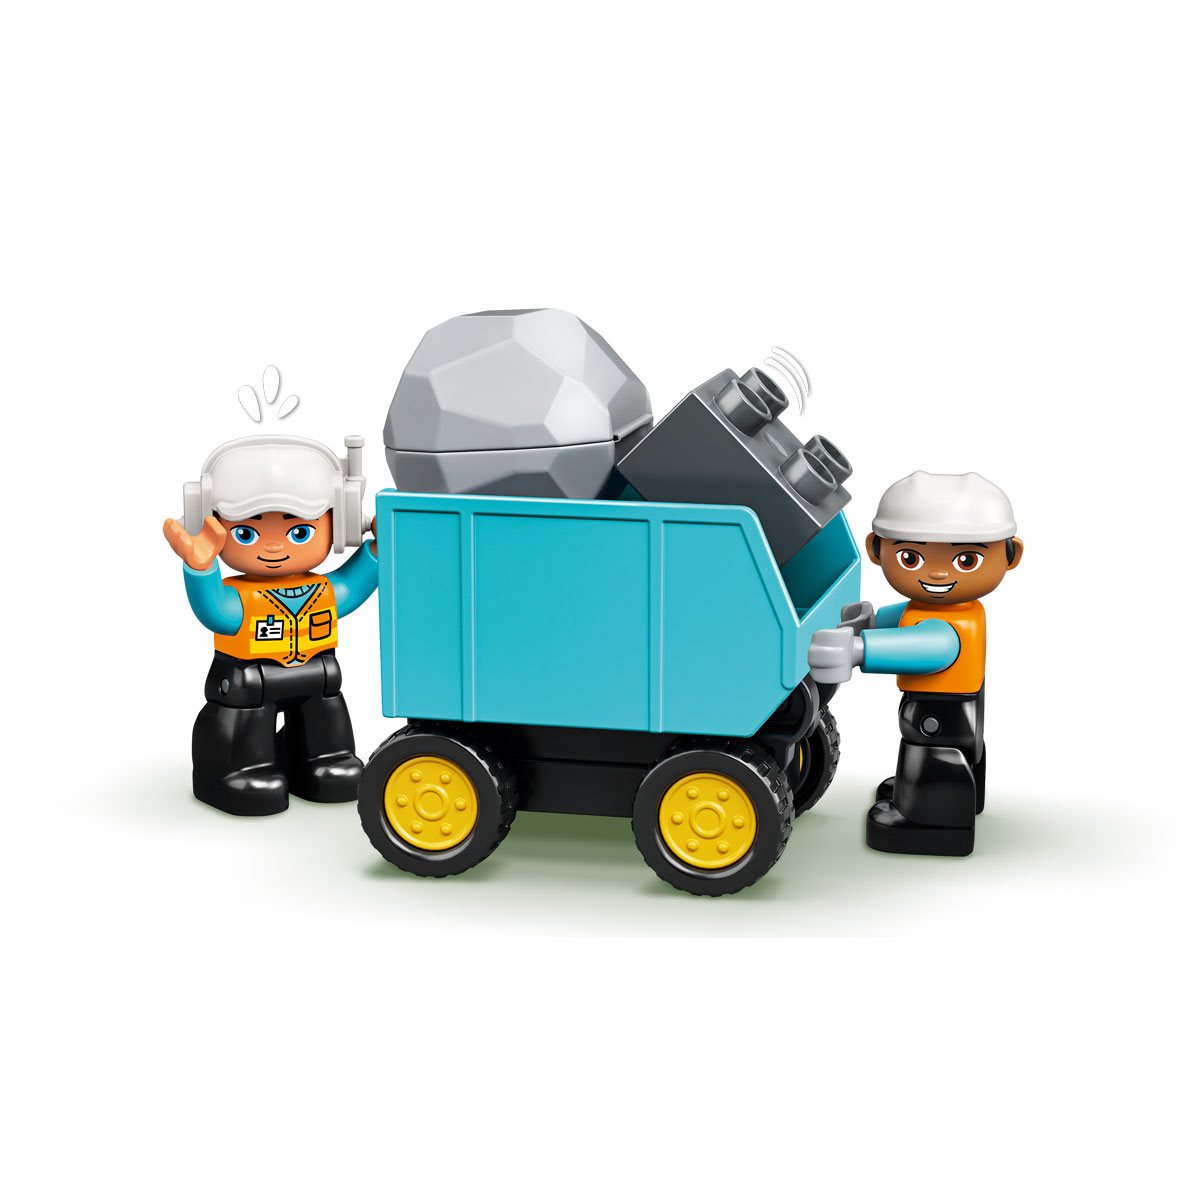 LEGO DUPLO Town Truck & Tracked Excavator 10931 by LEGO